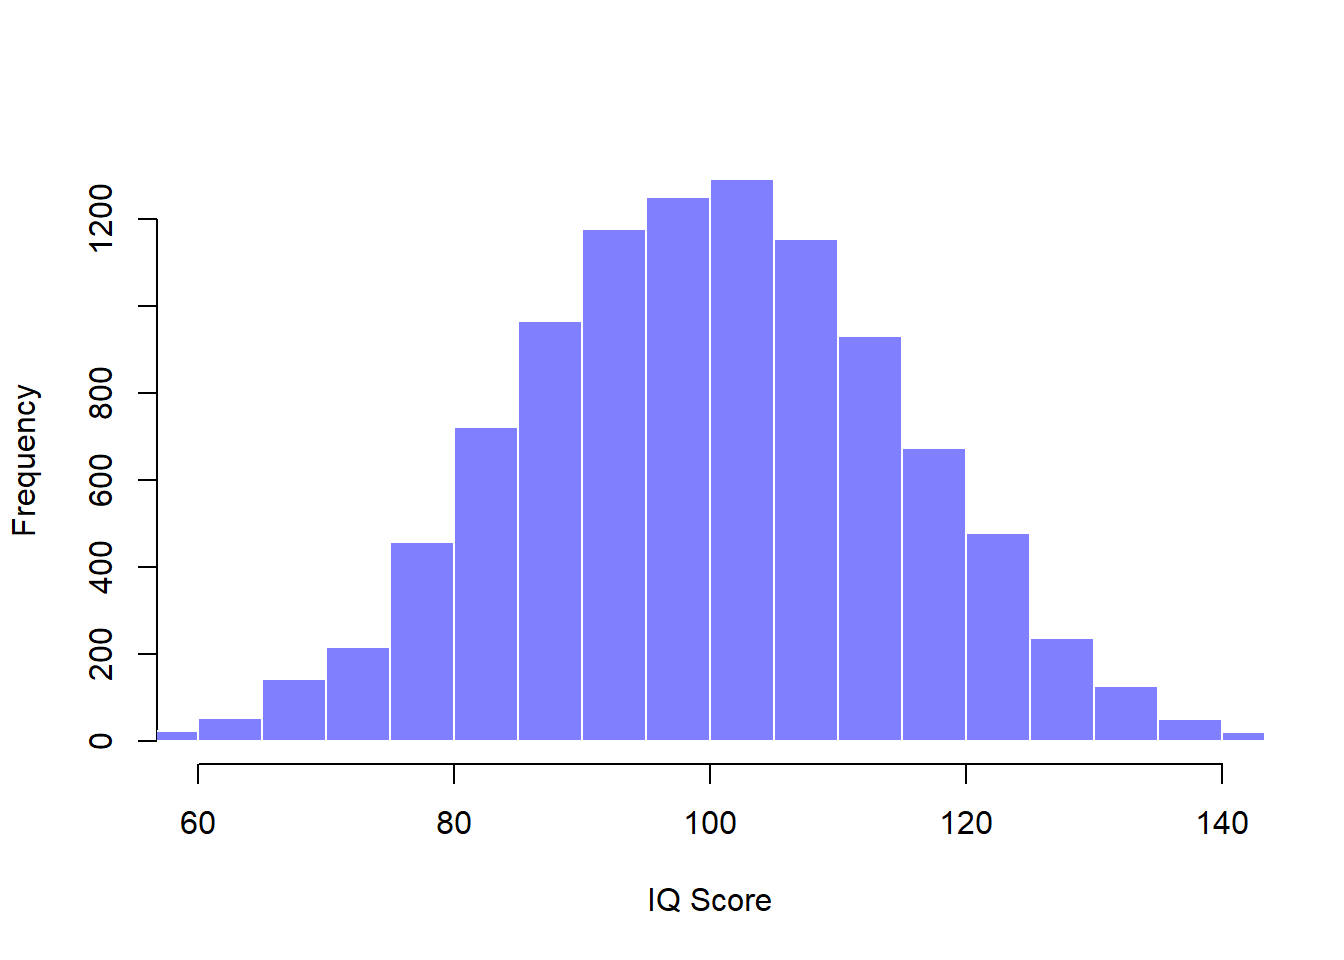 The population distribution of IQ scores (panel a) and two samples drawn randomly from it. In panel b we have a sample of 100 observations, and panel c we have a sample of 10,000 observations.